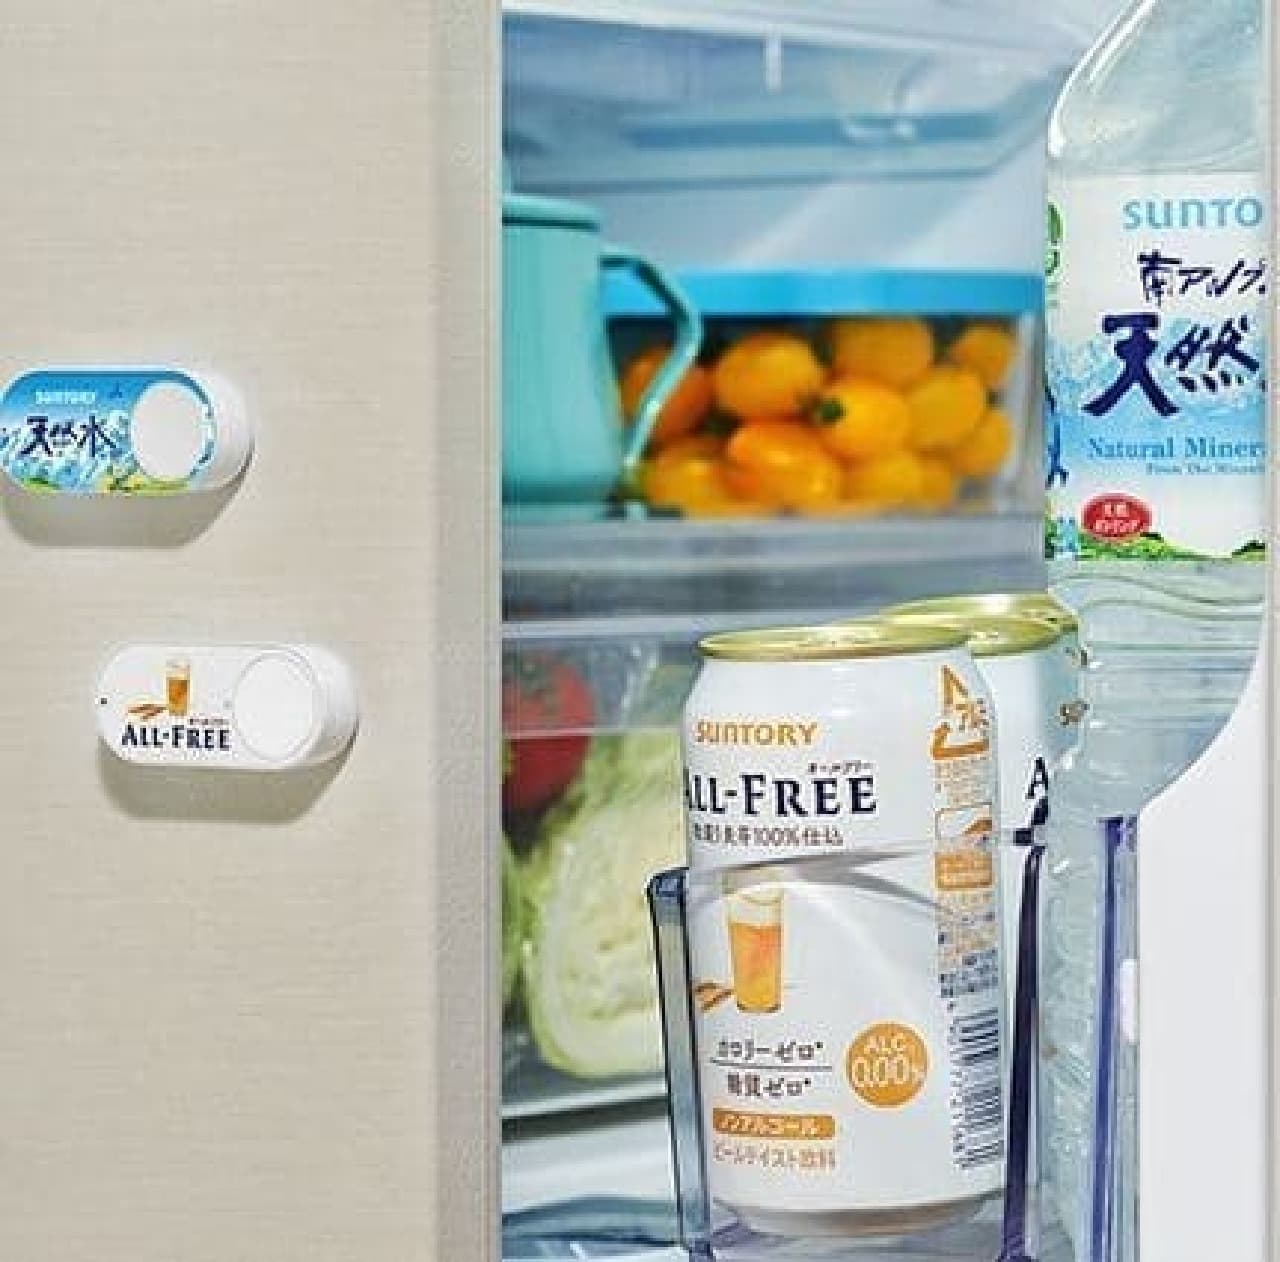 "Amazon Dash Button" now on sale in Japan